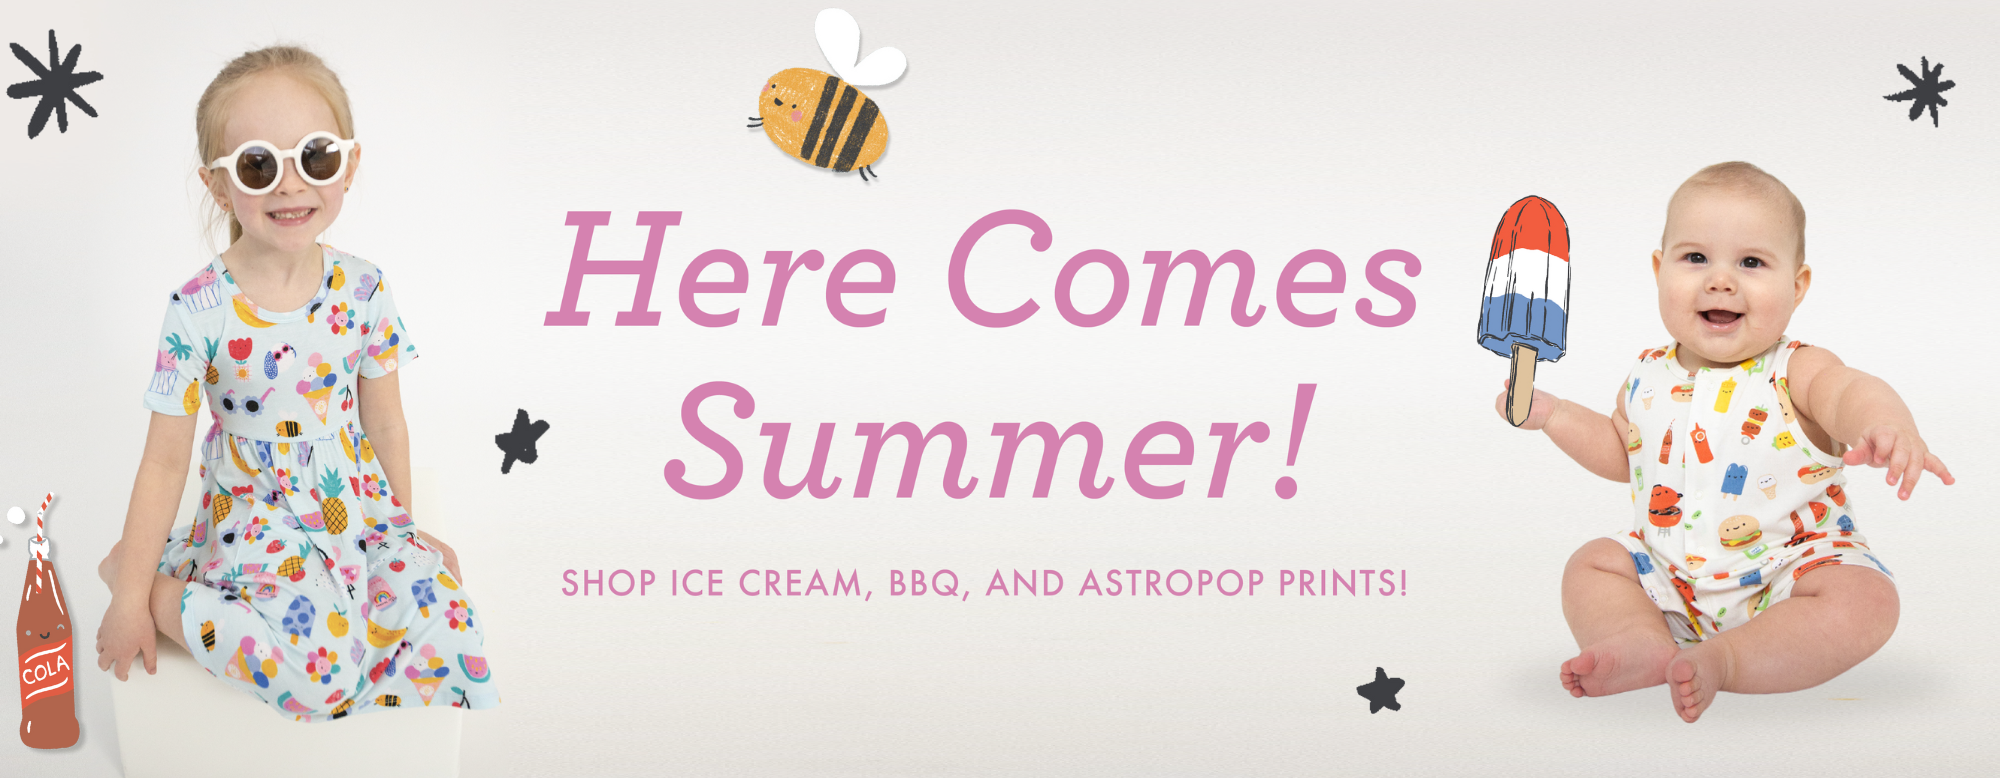 A girl dress in an ice cream summer print with a baby holding an popsicle dressed in summer bbq print - "Here Comes Summer!"